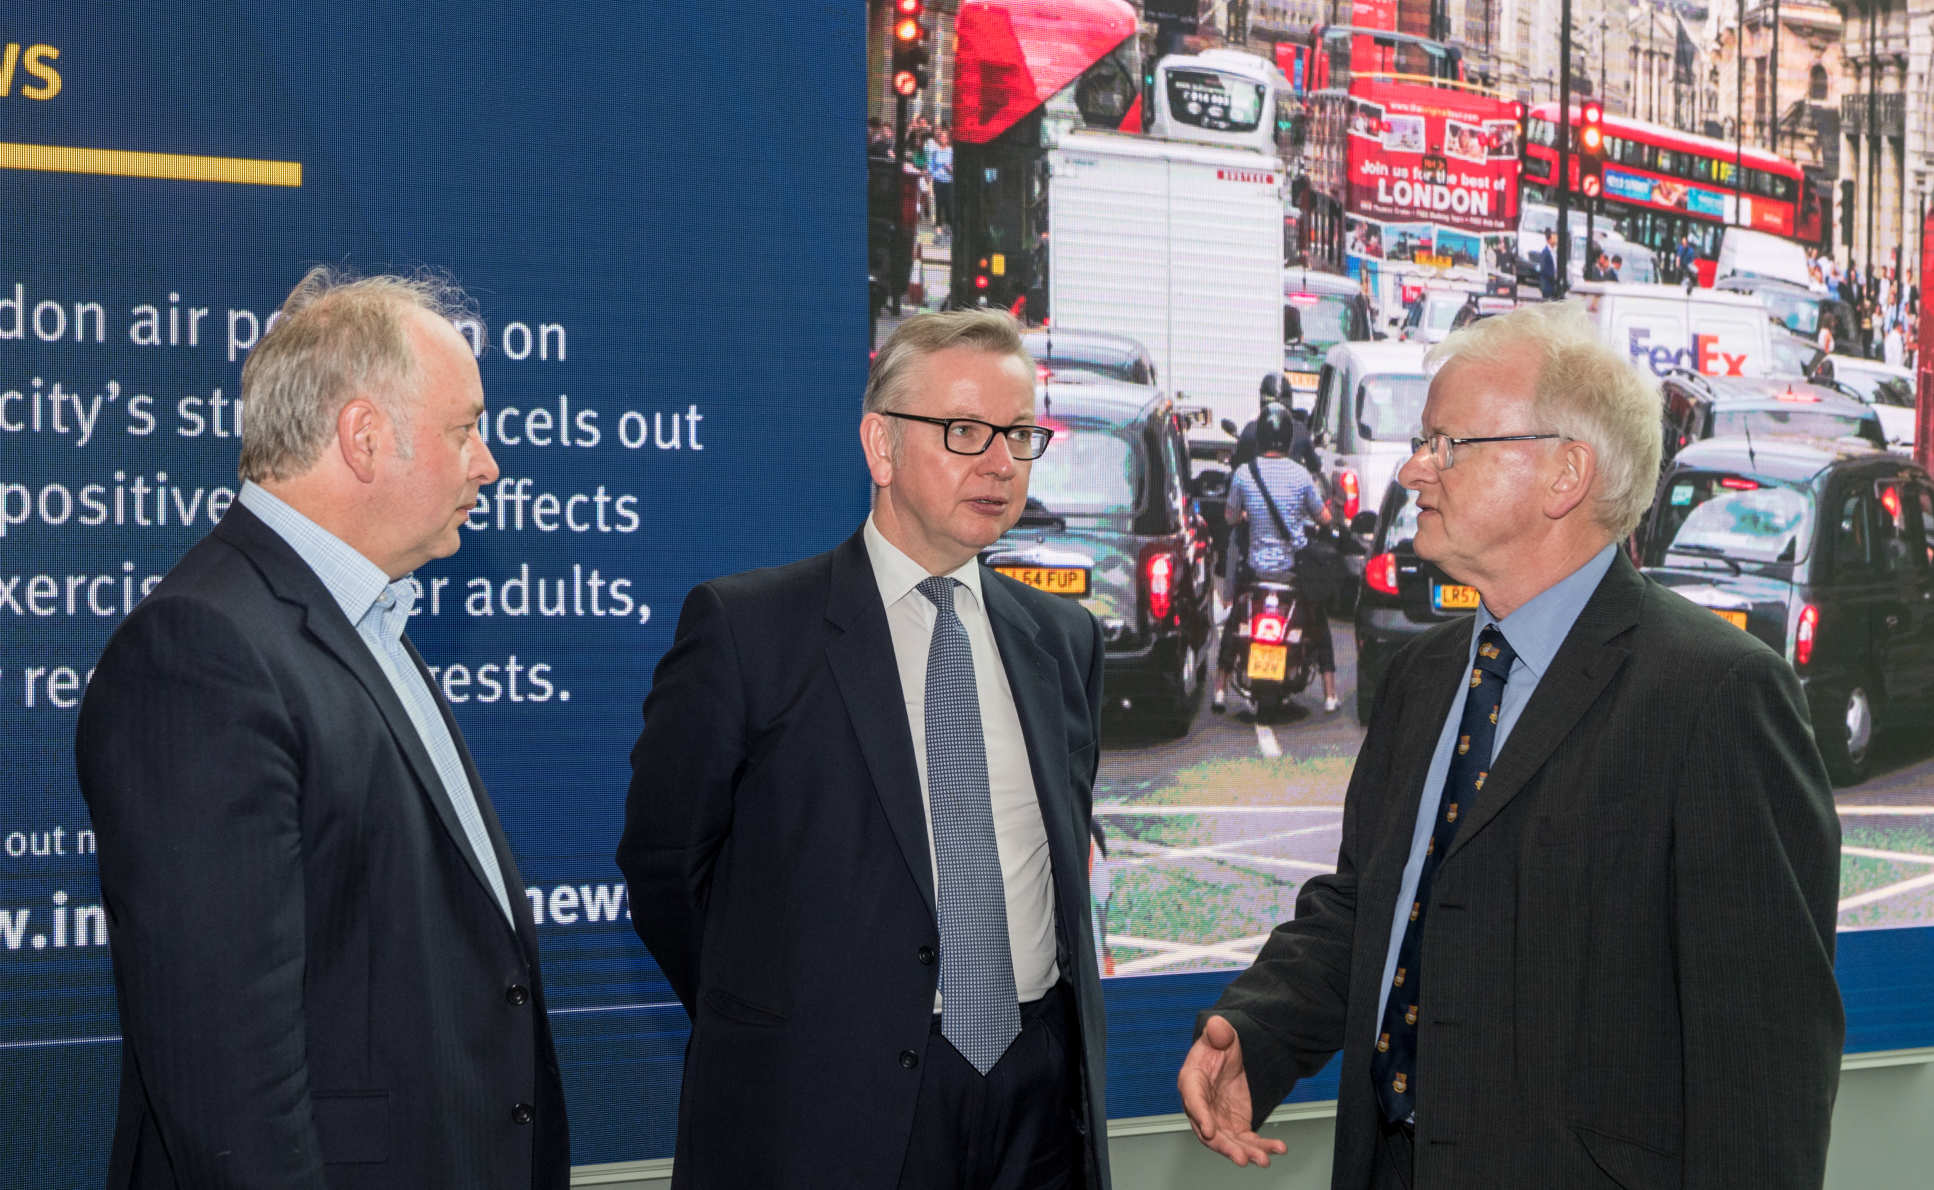 Michael Gove and Provost and Vice Provost